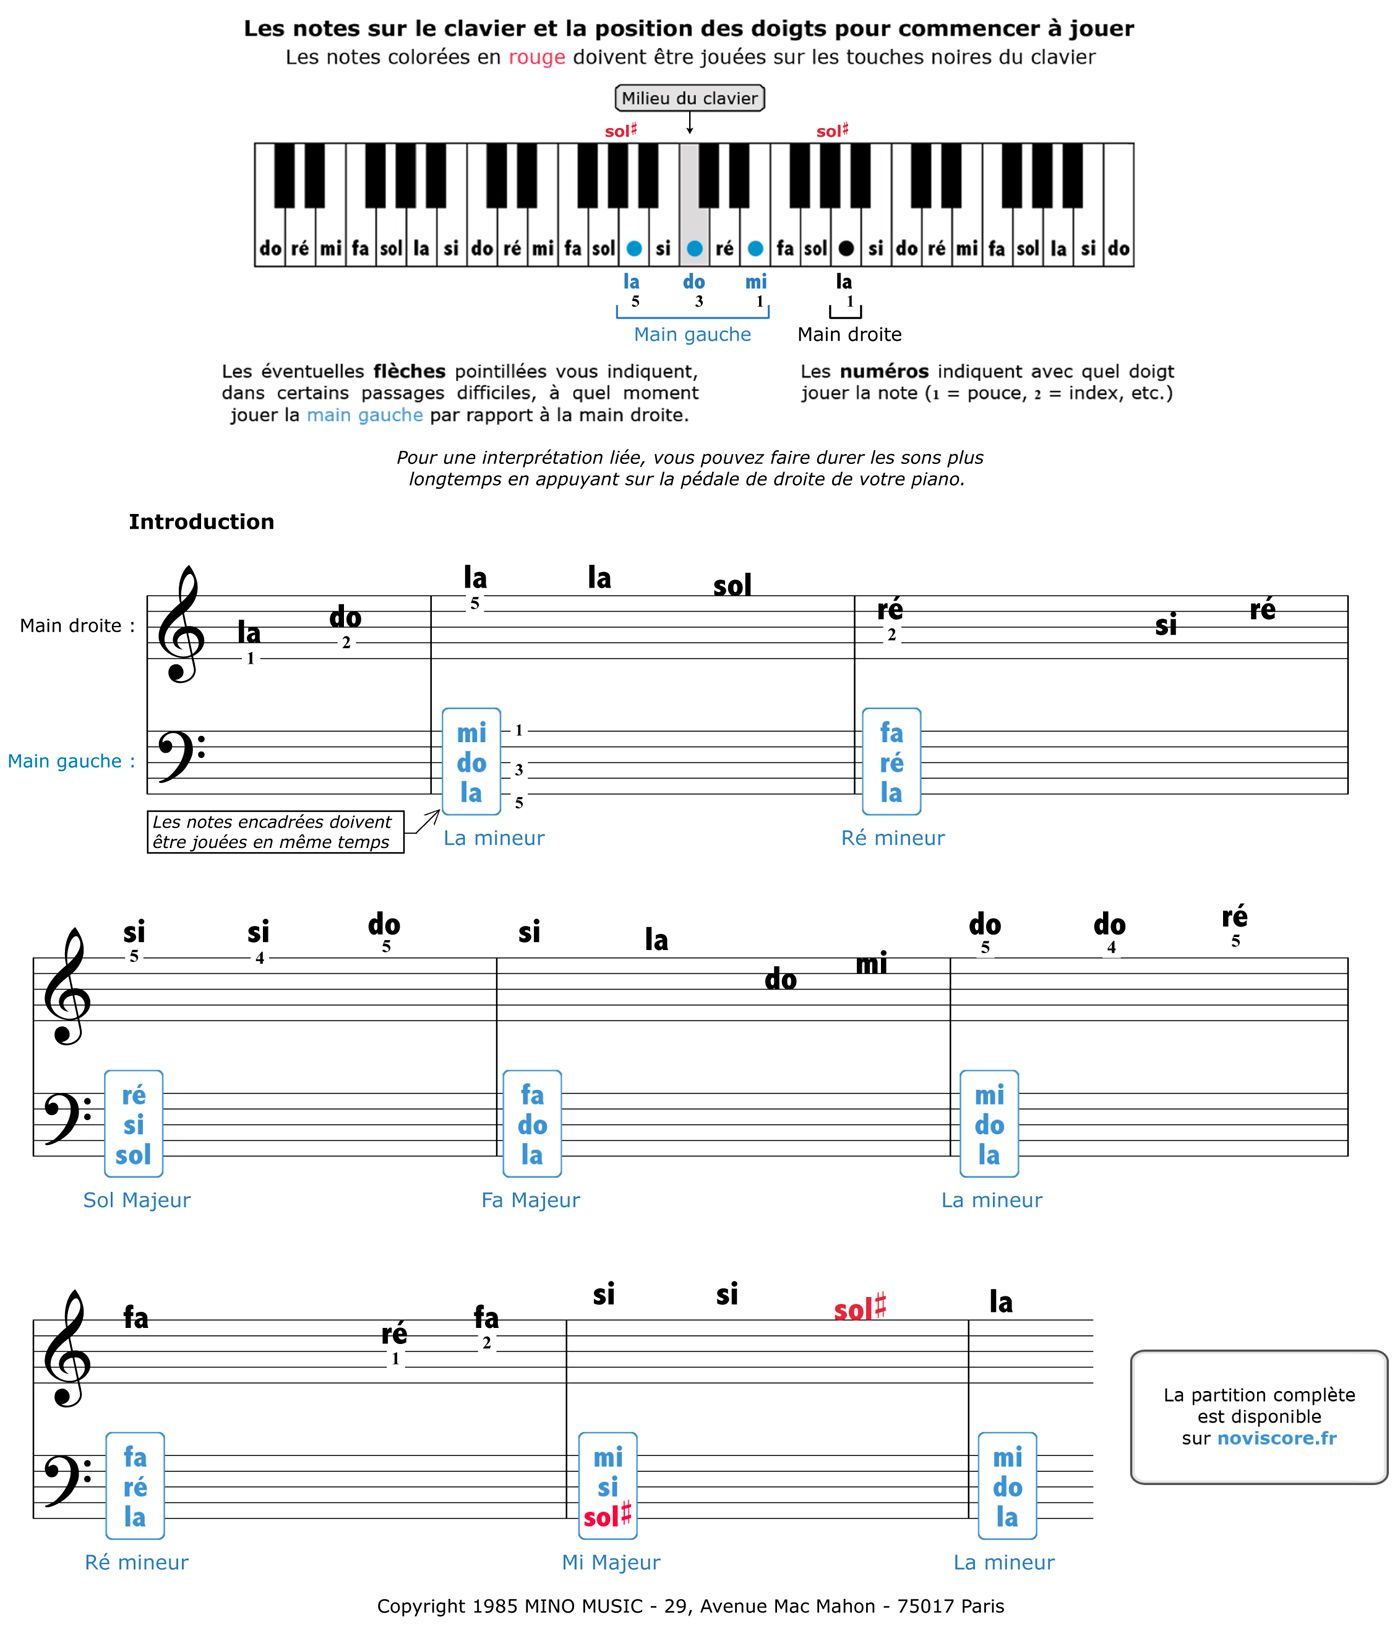 Tablature piano mistral gagnant